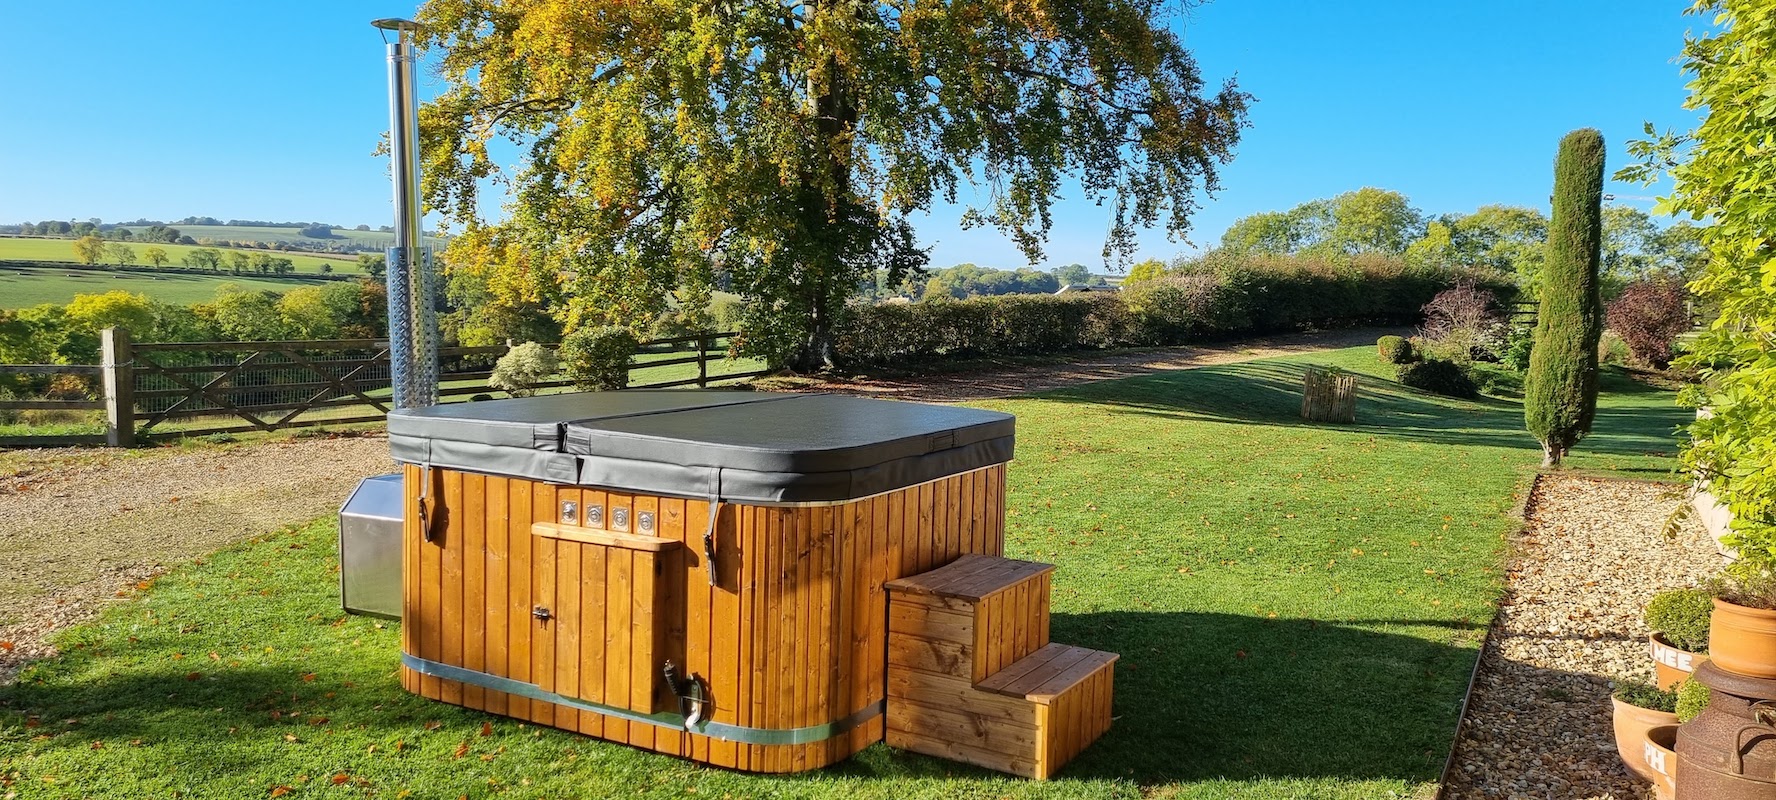 8 seat wood-fired hot tub at our showroom in the Cotswolds, Oxfordshire